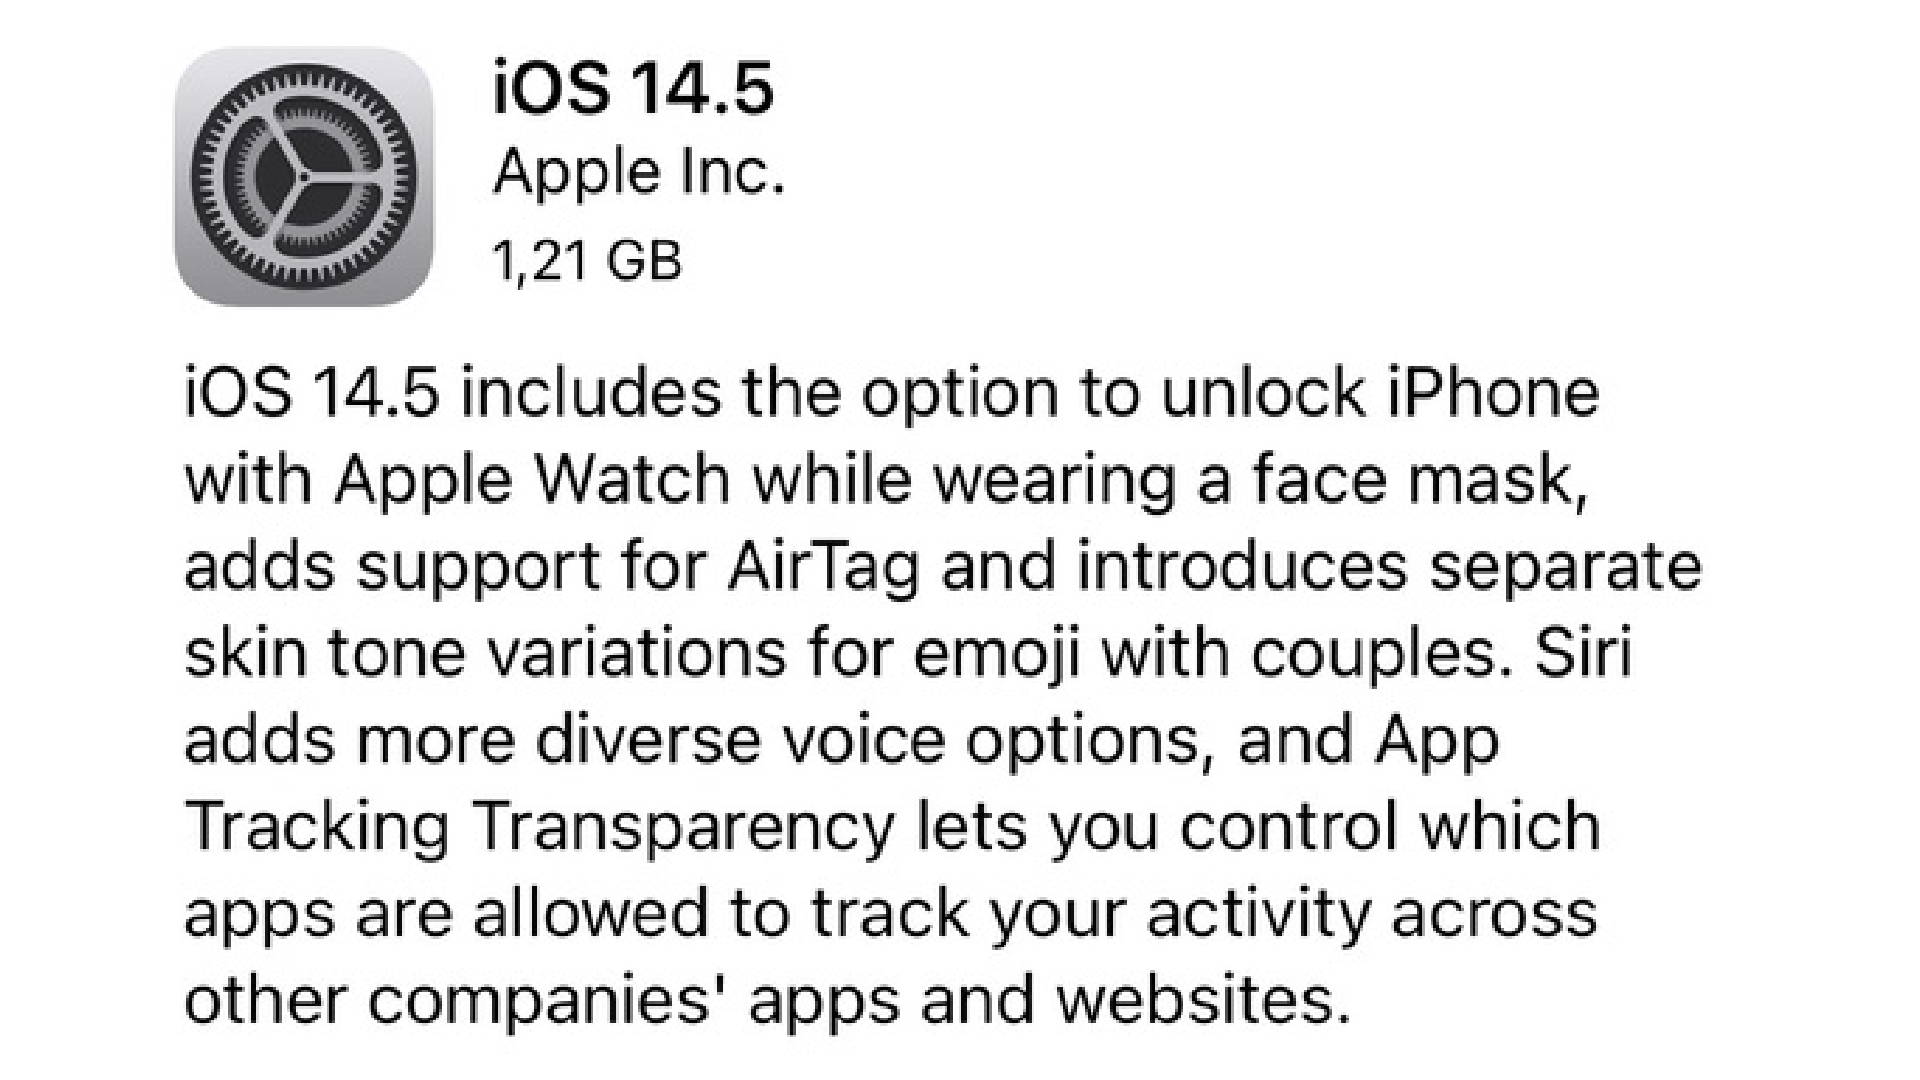 Apple releases the App Tracking Transparency (ATT) in iOS 14.5 update